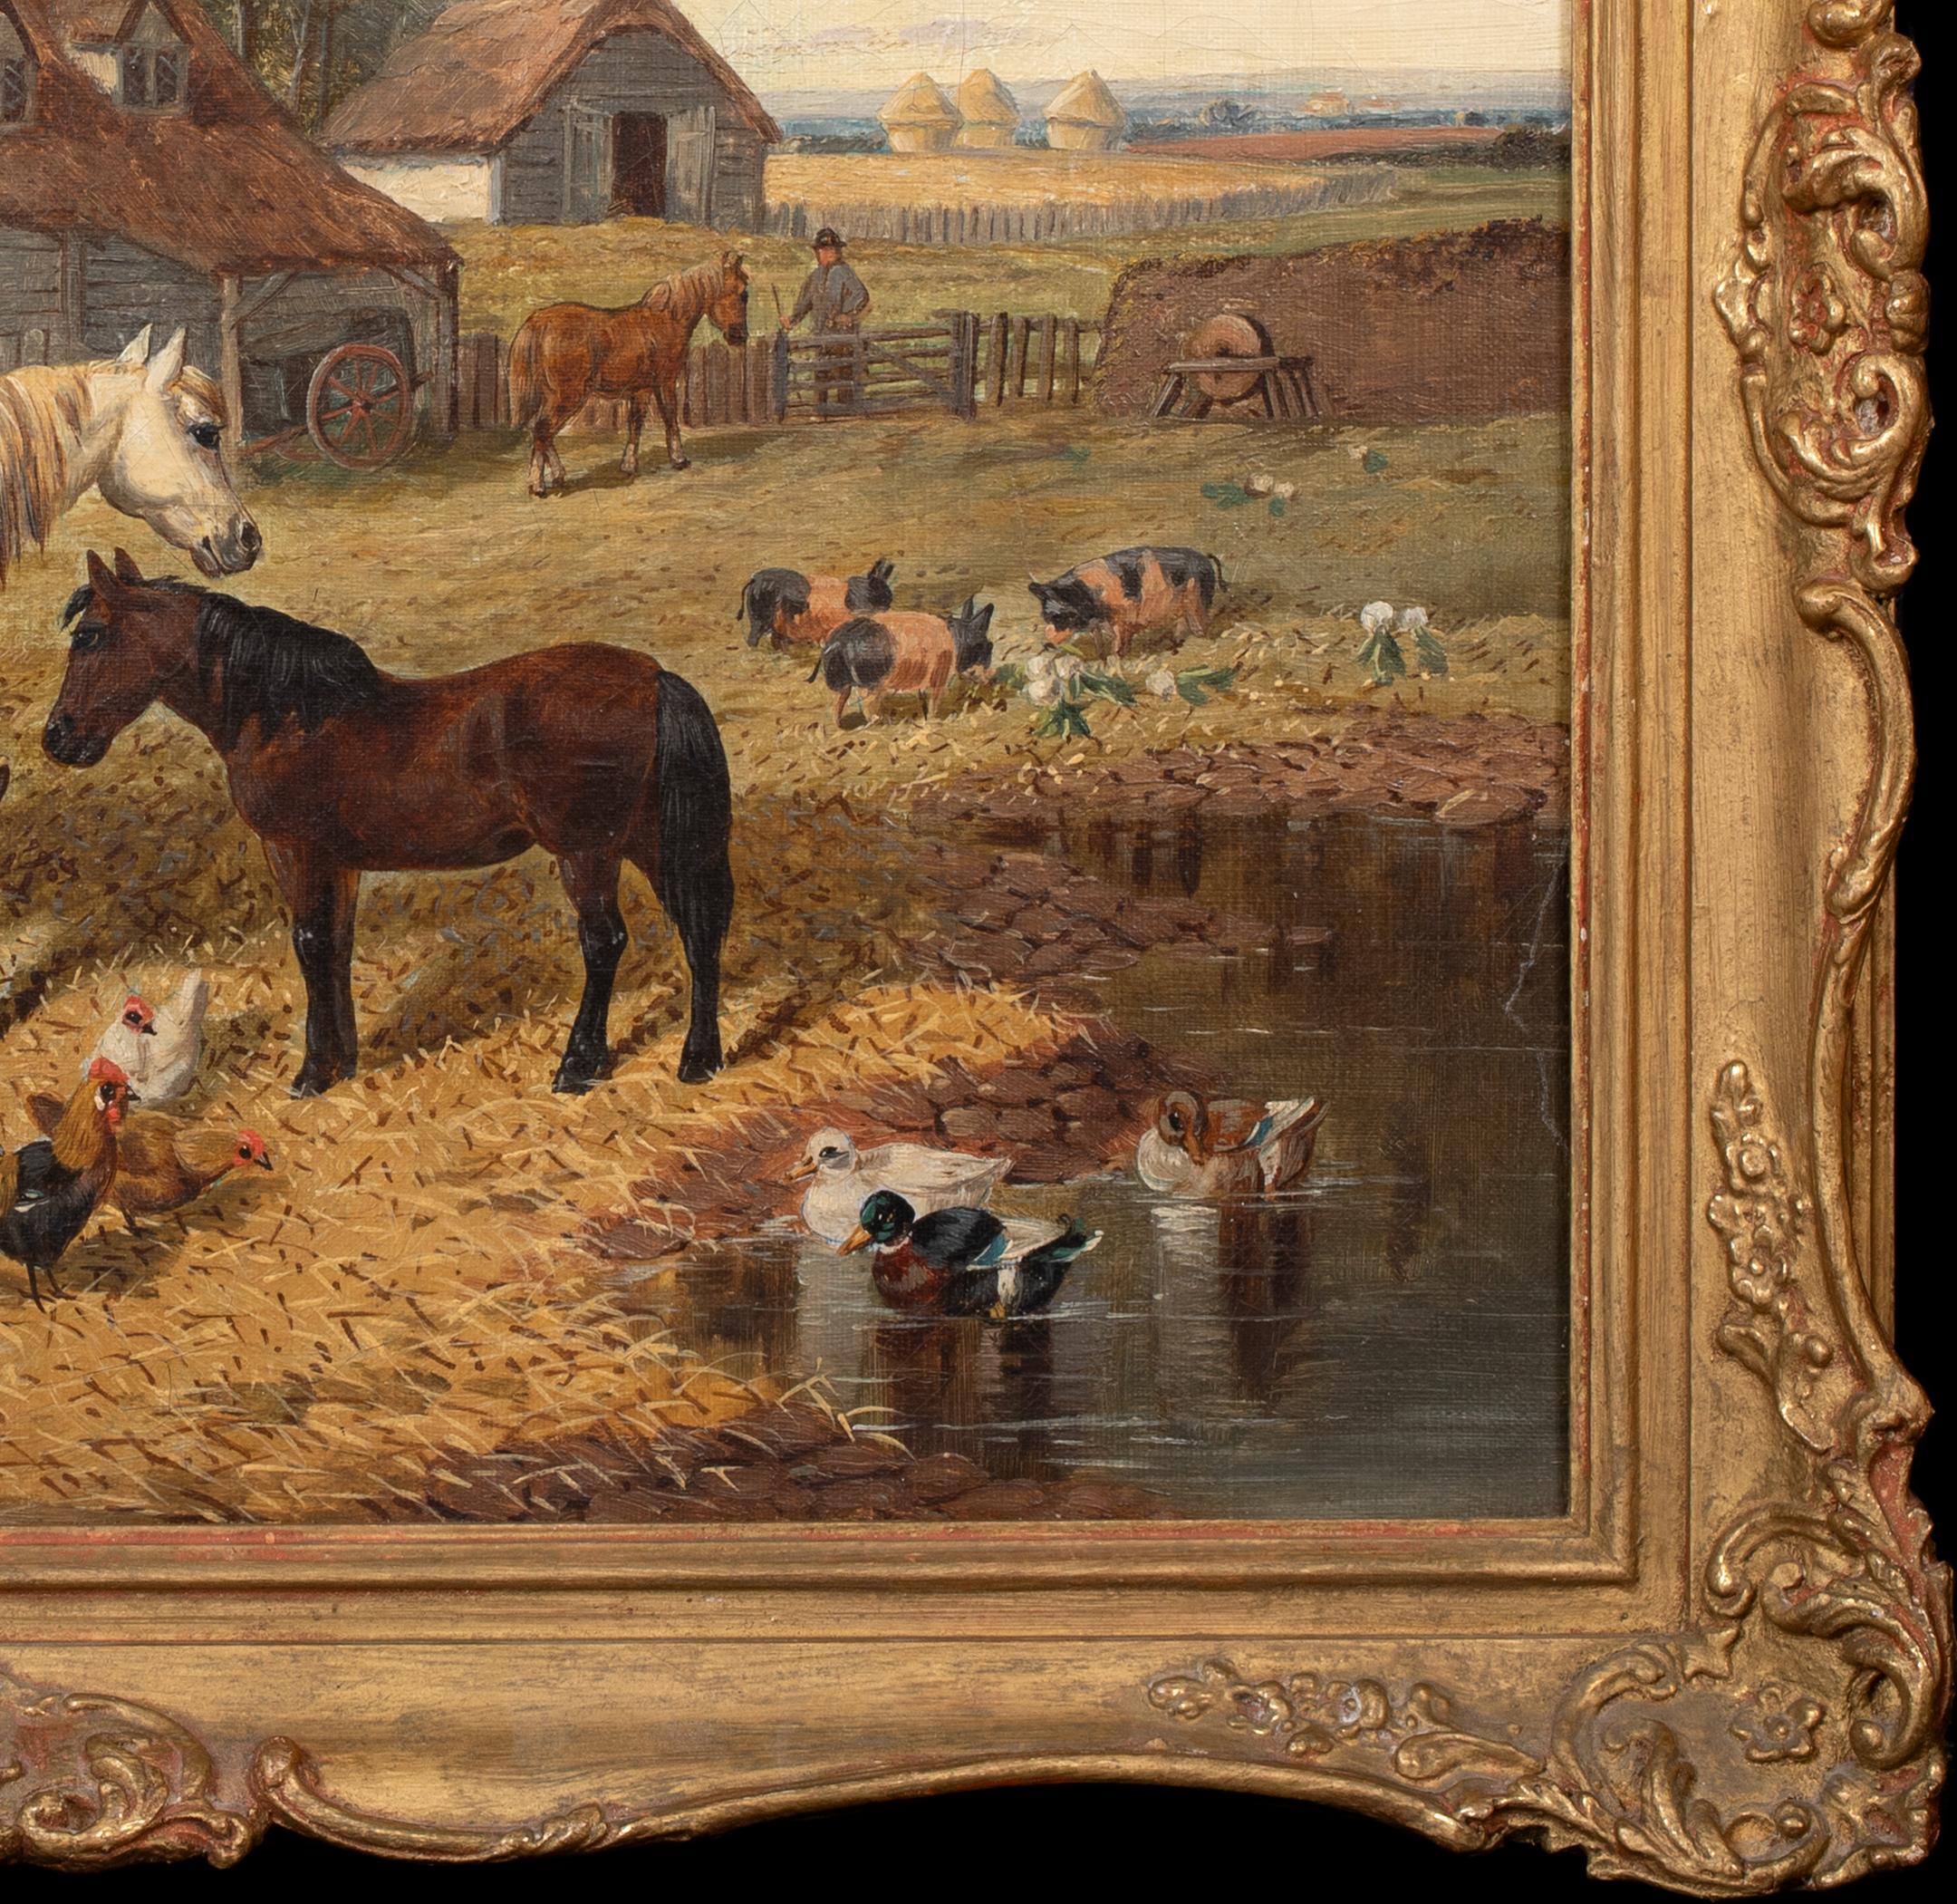 Horses, Chickens & Pigs On The Farm, 17th Century   by John Frederick II HERRING For Sale 1